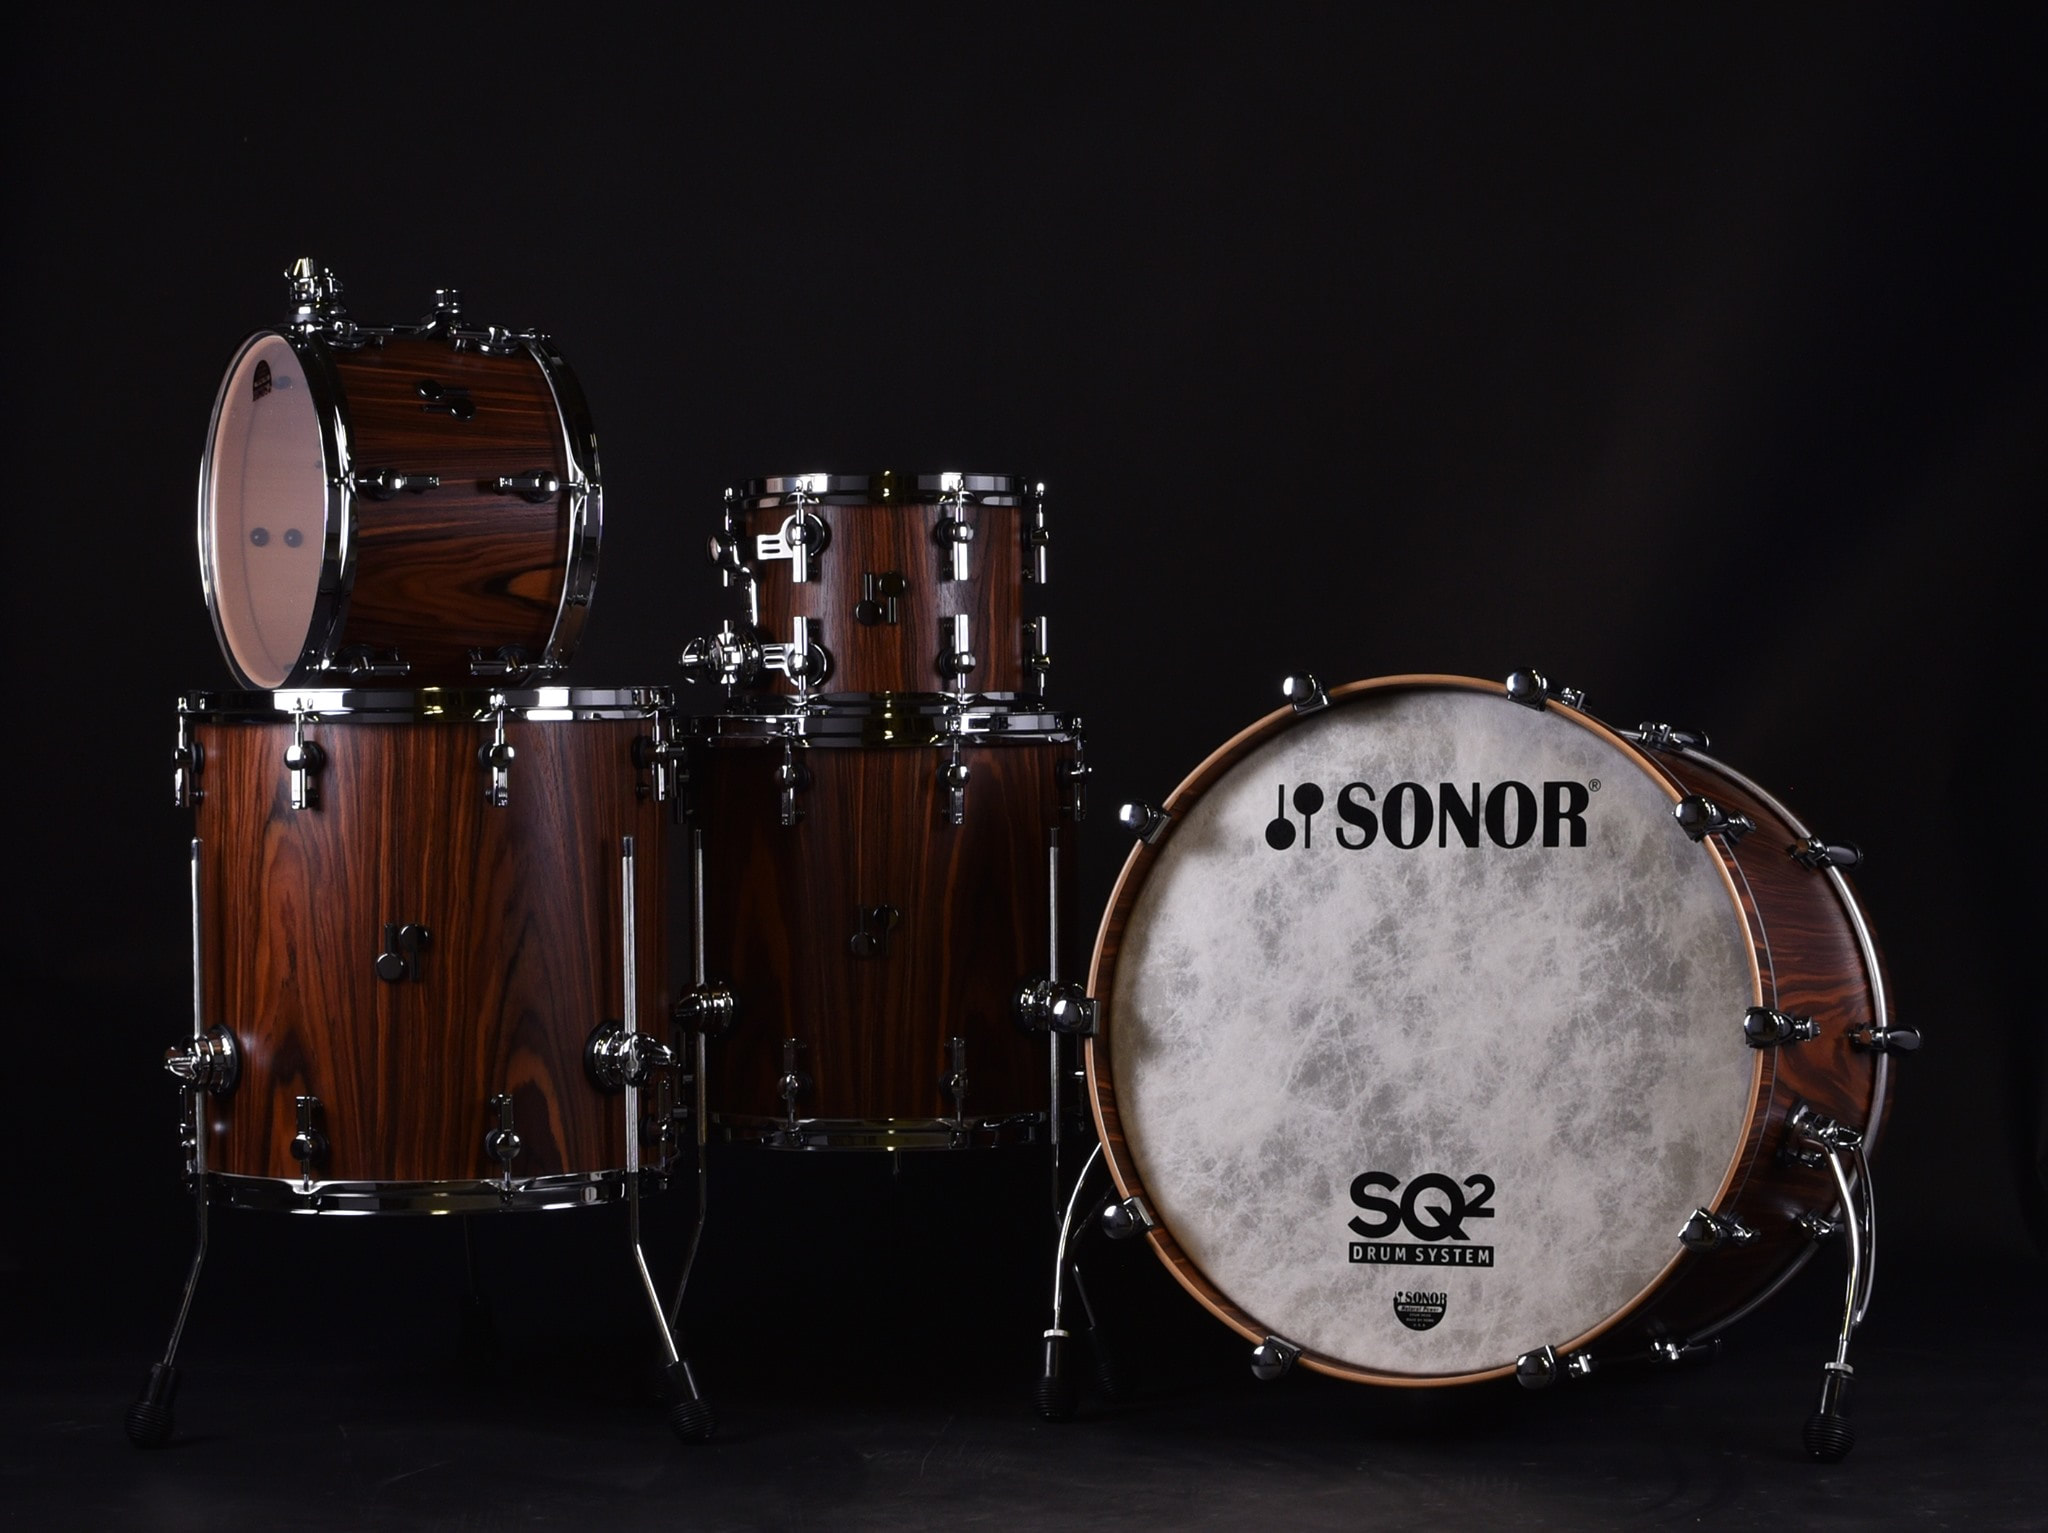 SONOR SONOR acoustic Drum Kit extras in perfect quality 